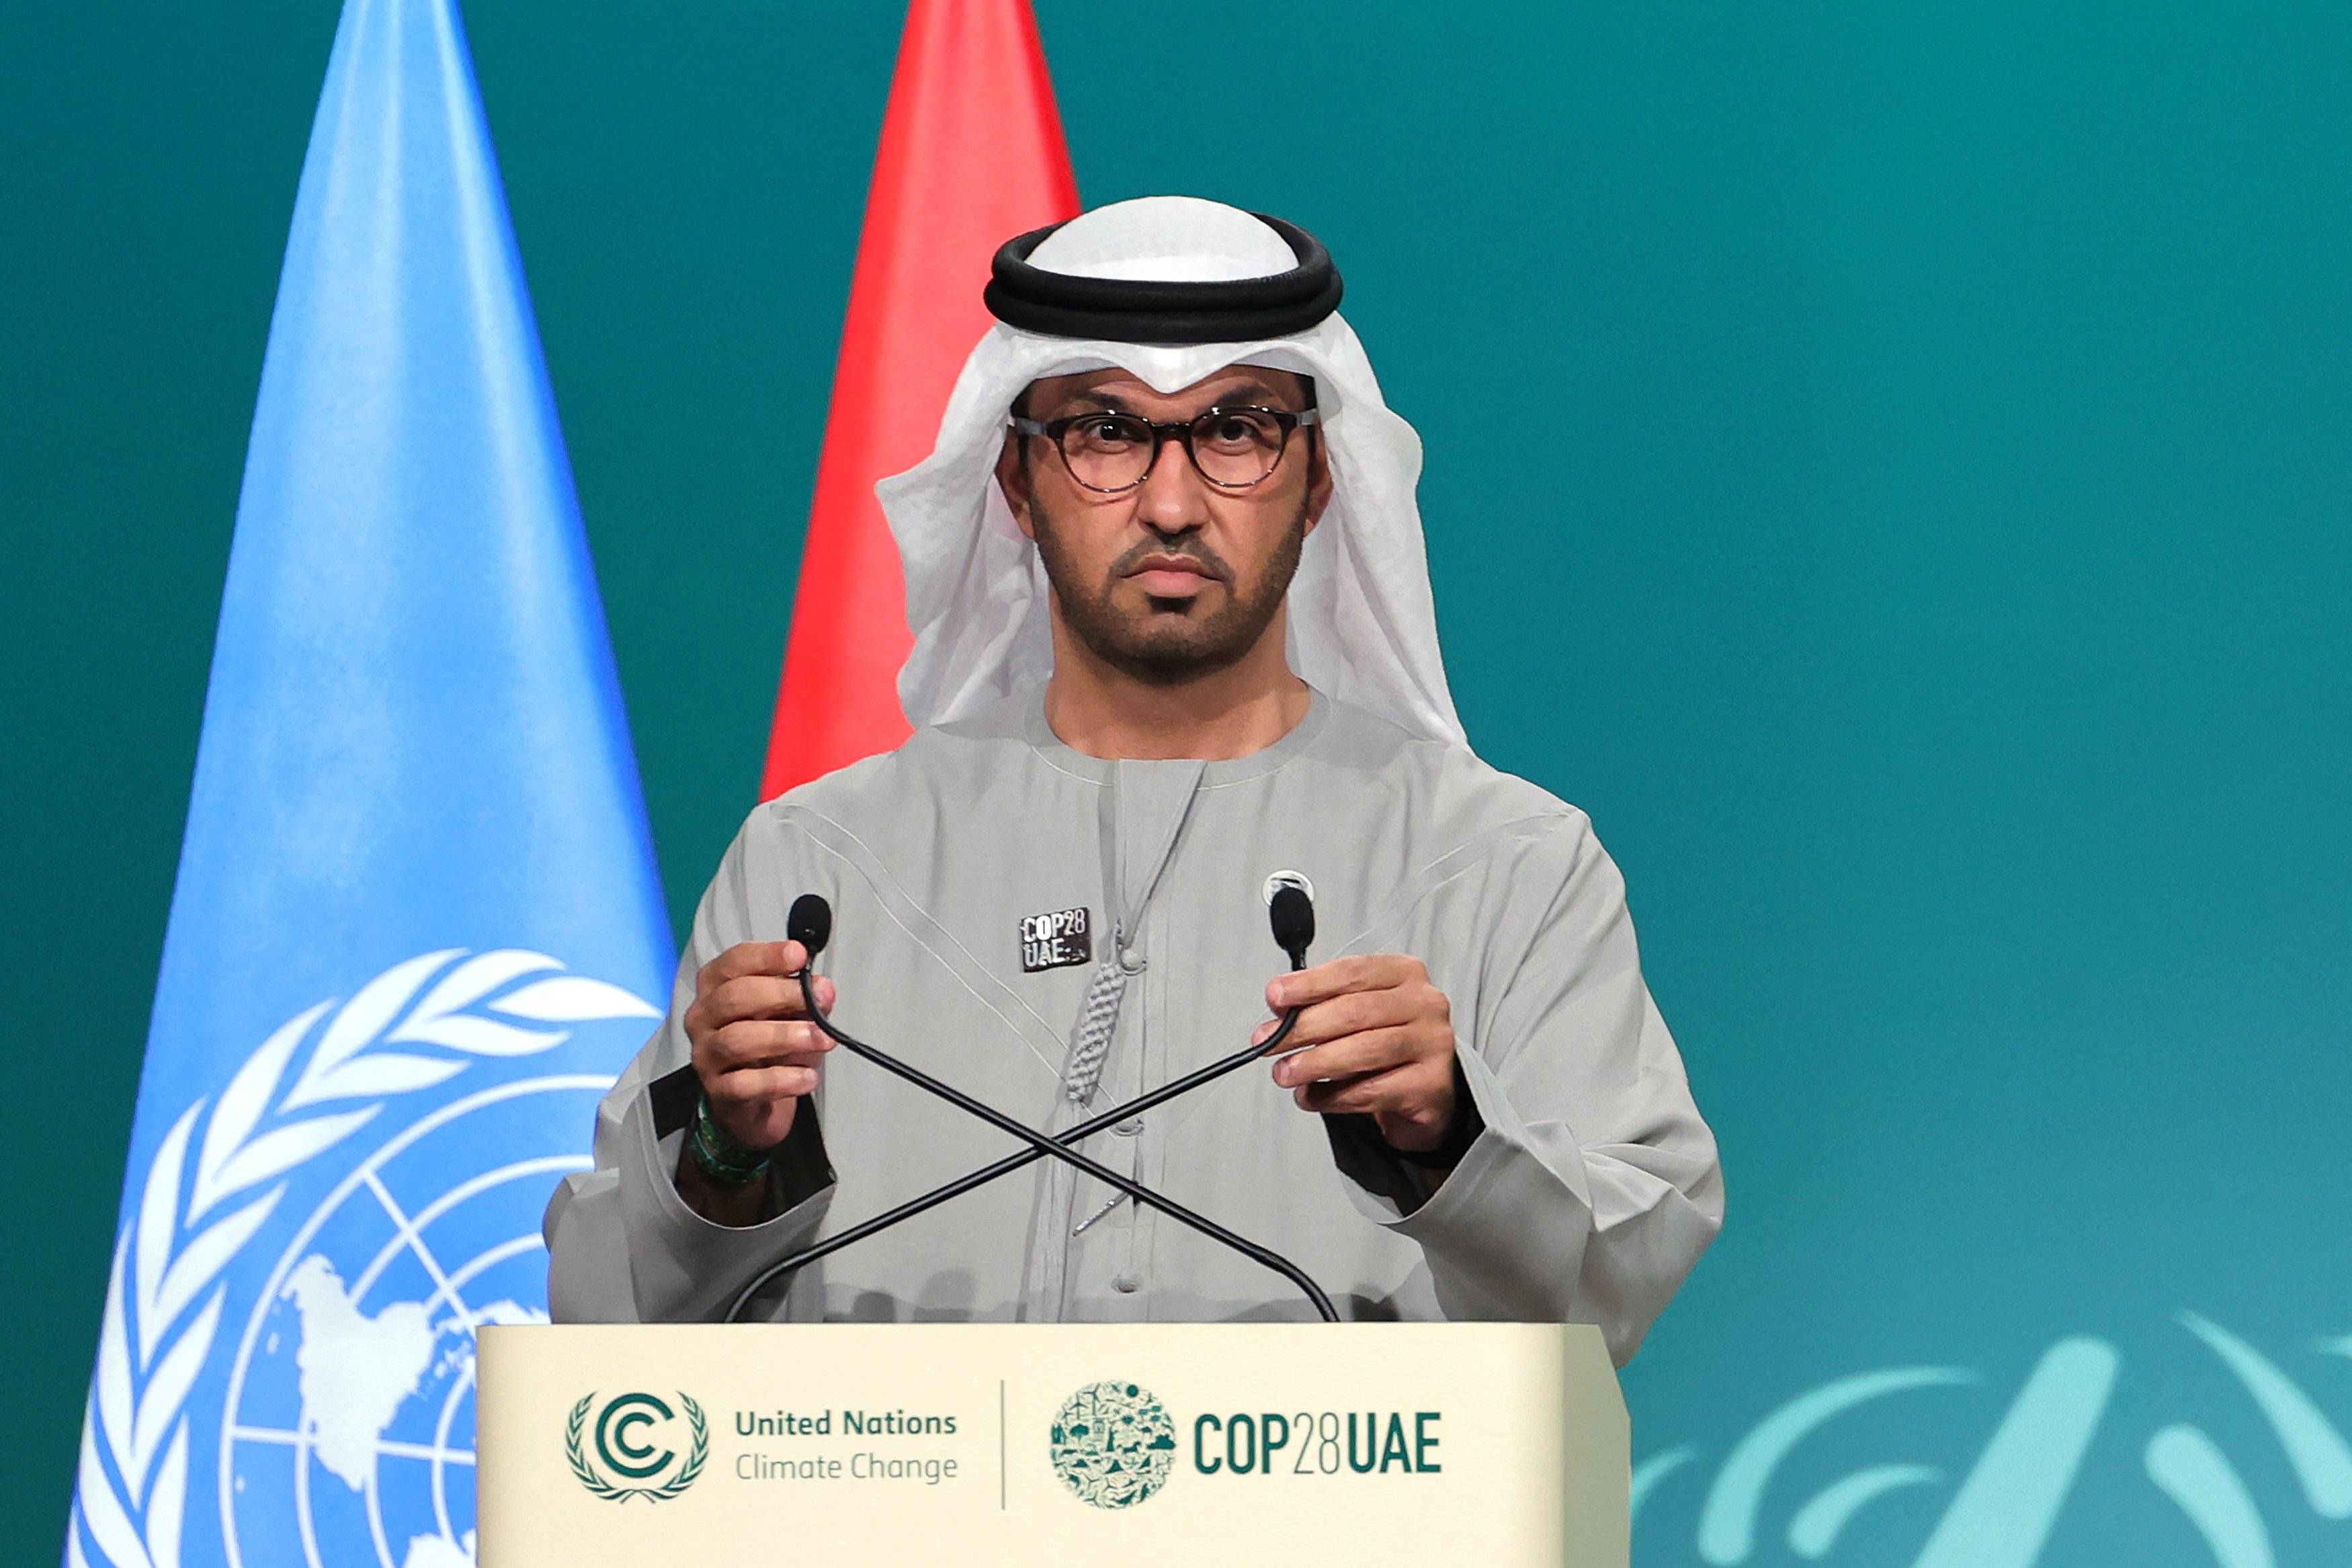 COP28 president Sultan Ahmed Al Jaber adjusts his microphone during a plenary session at the United Nations climate summit in Dubai on December 13, 2023. - Nations adopted the first ever UN climate deal that calls for the world to transition away from fossil fuels. "We have the basis to make transformational change happen," COP28 president Sultan Al Jaber said at the UN climate summit in Dubai before the deal was adopted by consensus, prompting delegates to rise and applaud. (Photo by Giuseppe CACACE / AFP)